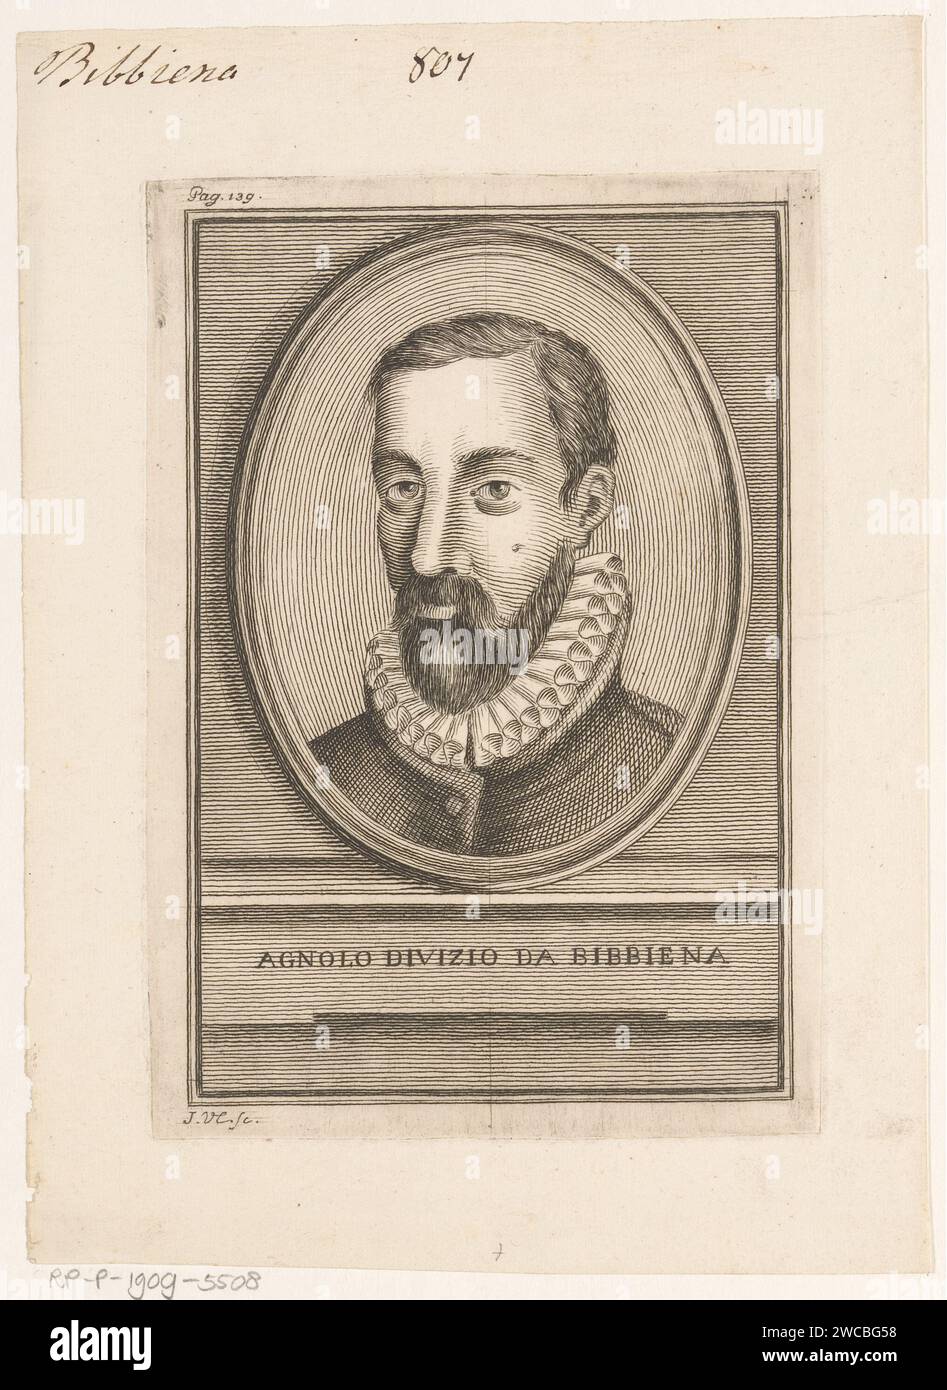 Portrait of songwriter Agnolo Divizio da Bibbiena, J. Verkruys, 1750 print Numbered in the top left: p. 139. print maker: Italypublisher: Lucca paper engraving historical persons. portrait of a writer. writer, poet, author Stock Photo